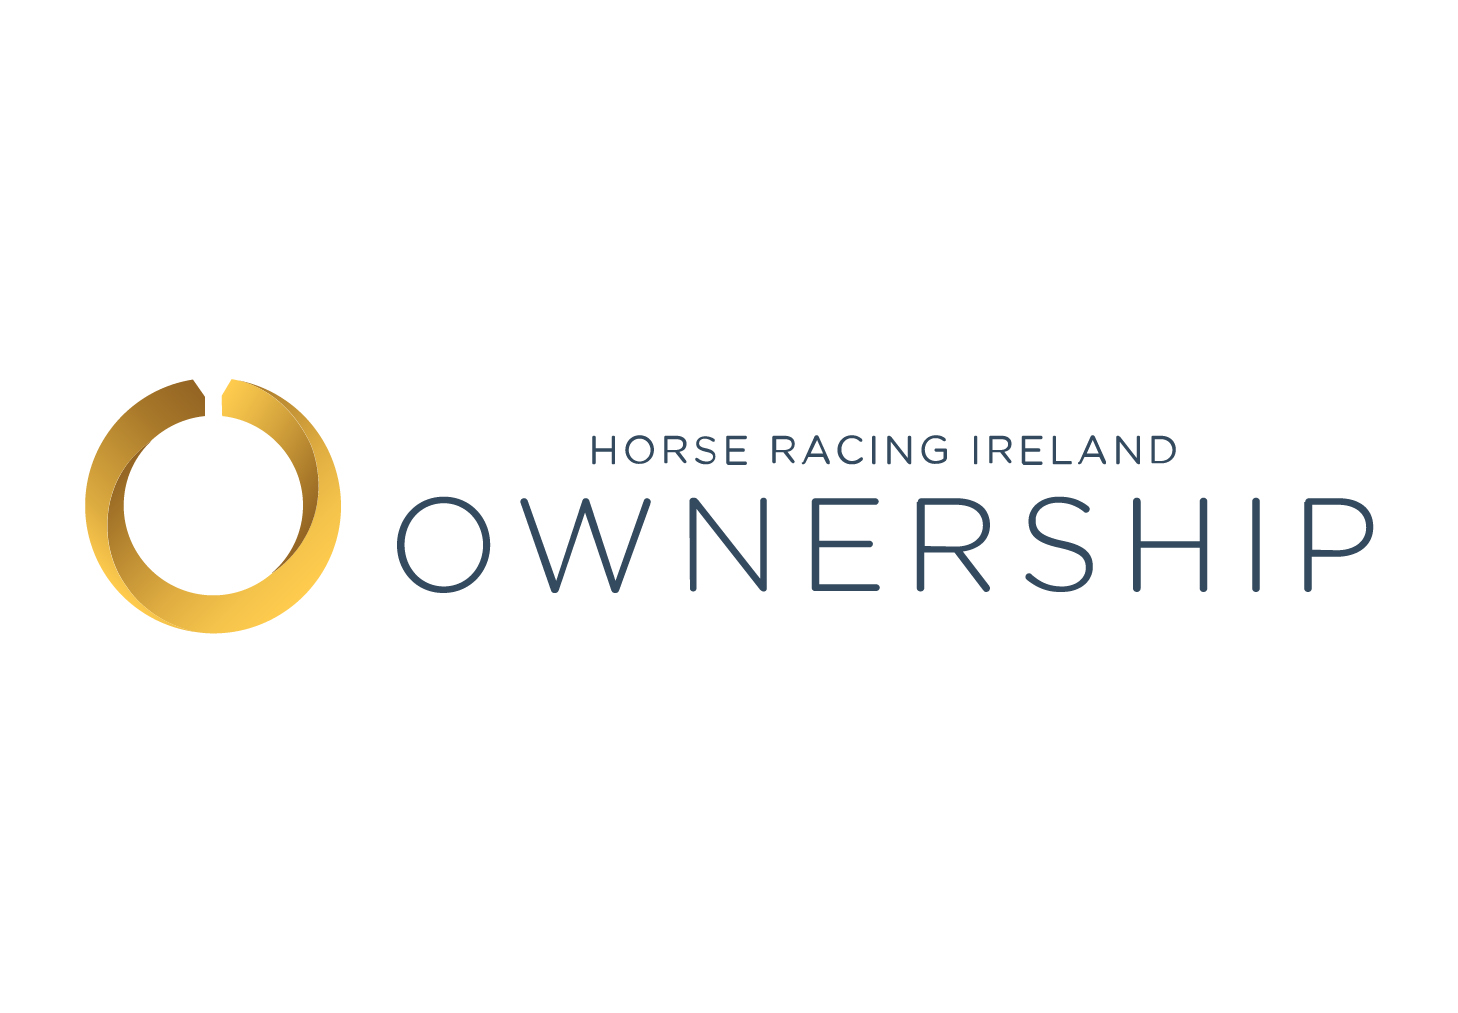 Ownership and Trainers